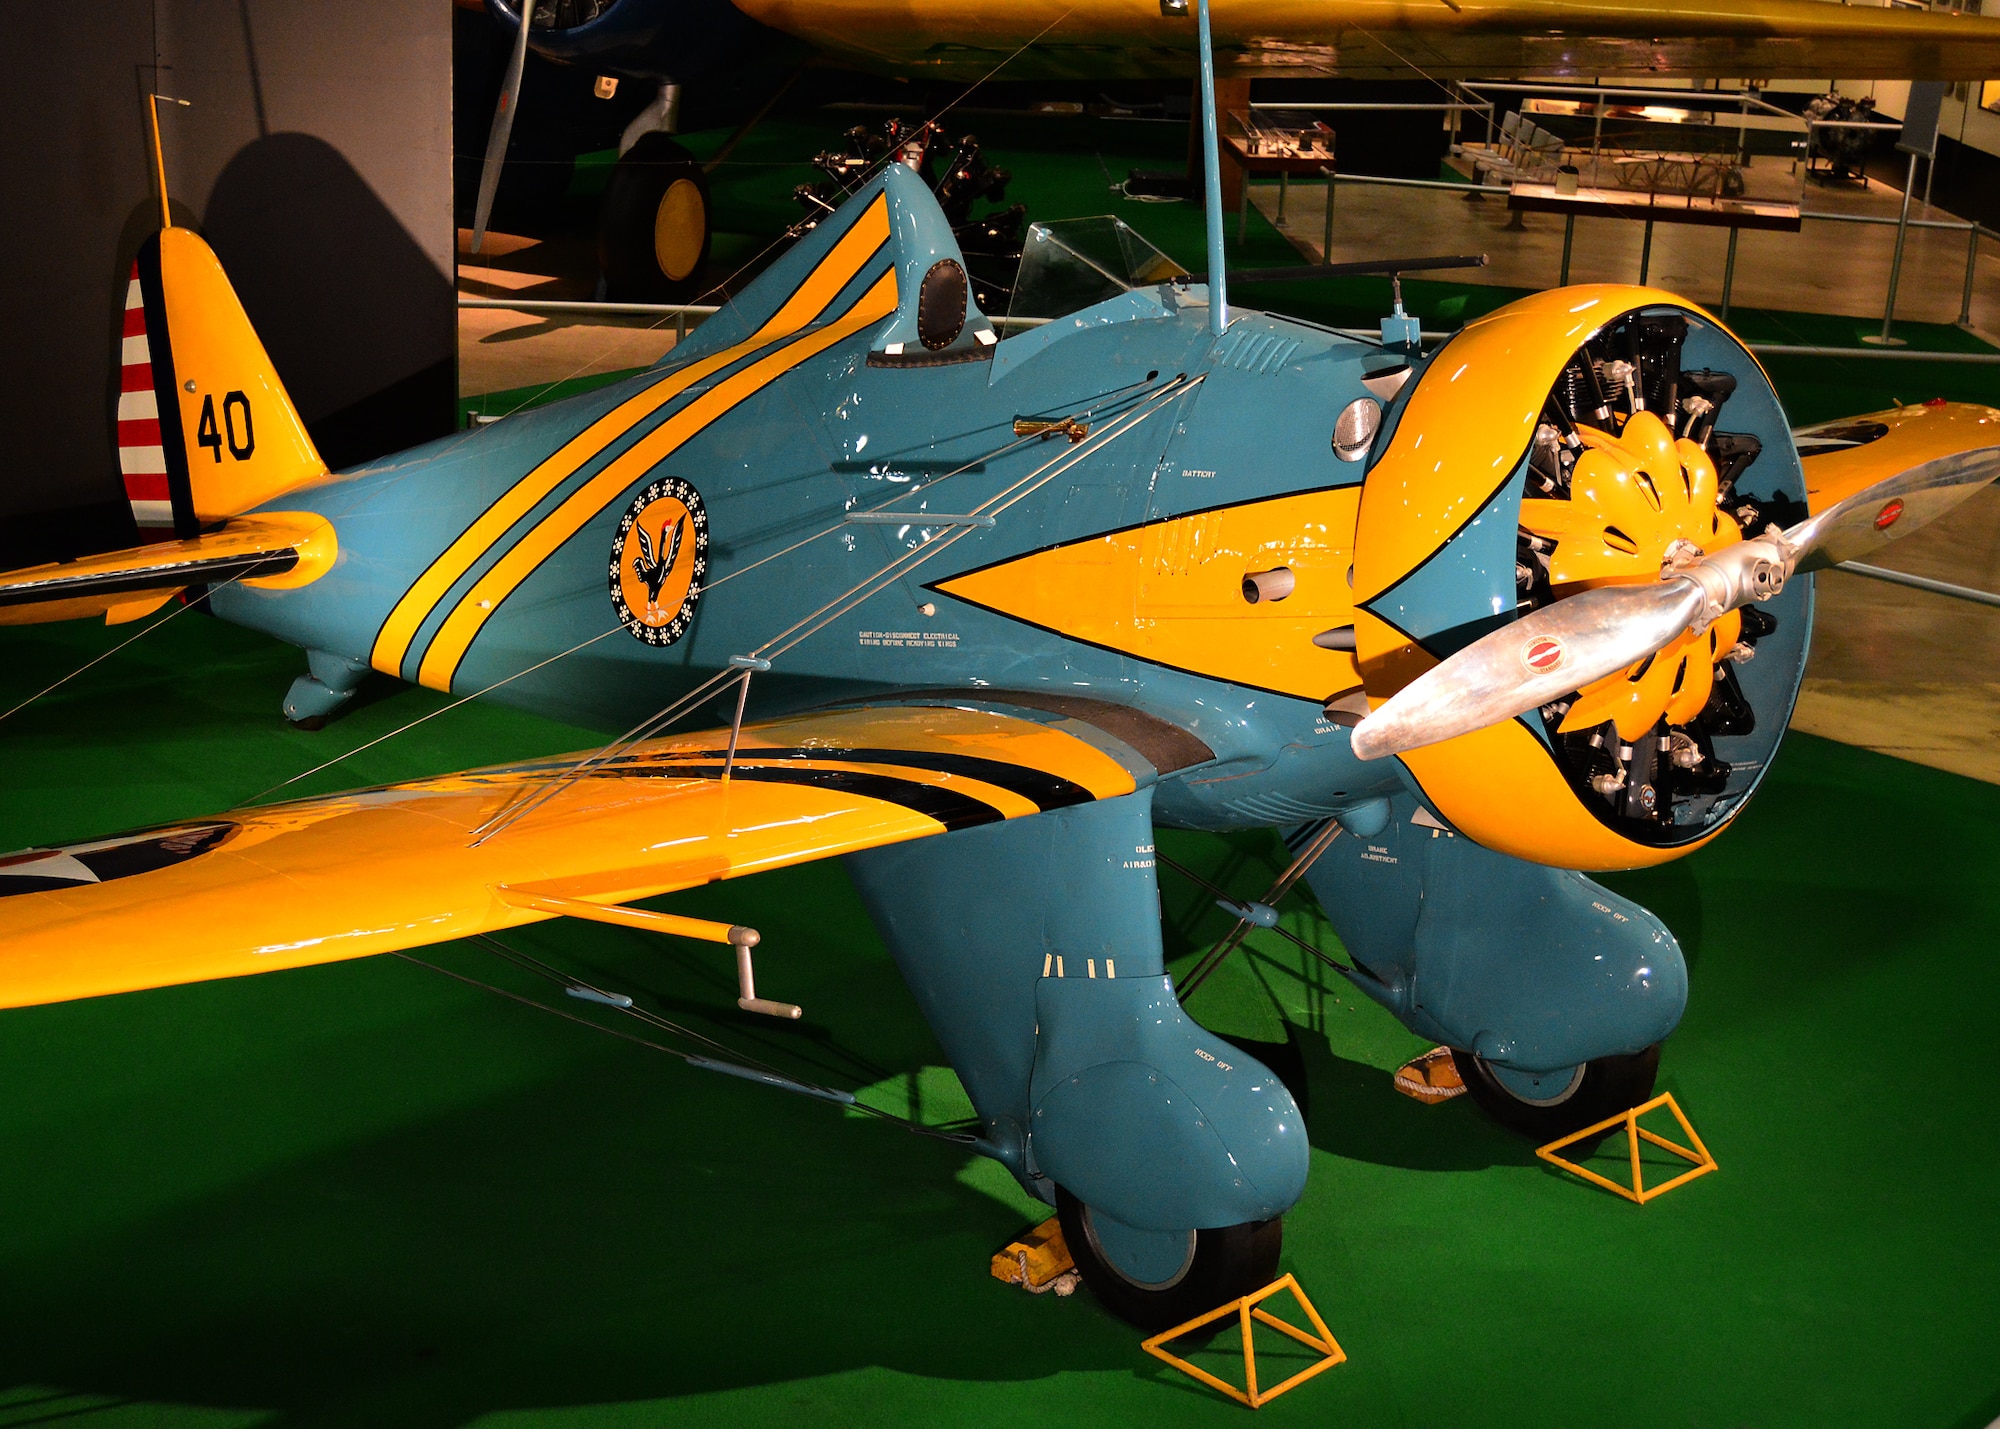 DAYTON, Ohio -- Boeing P-26A on display in the Early Years Gallery at the National Museum of the United States Air Force. (U.S. Air Force photo by Ken LaRock)